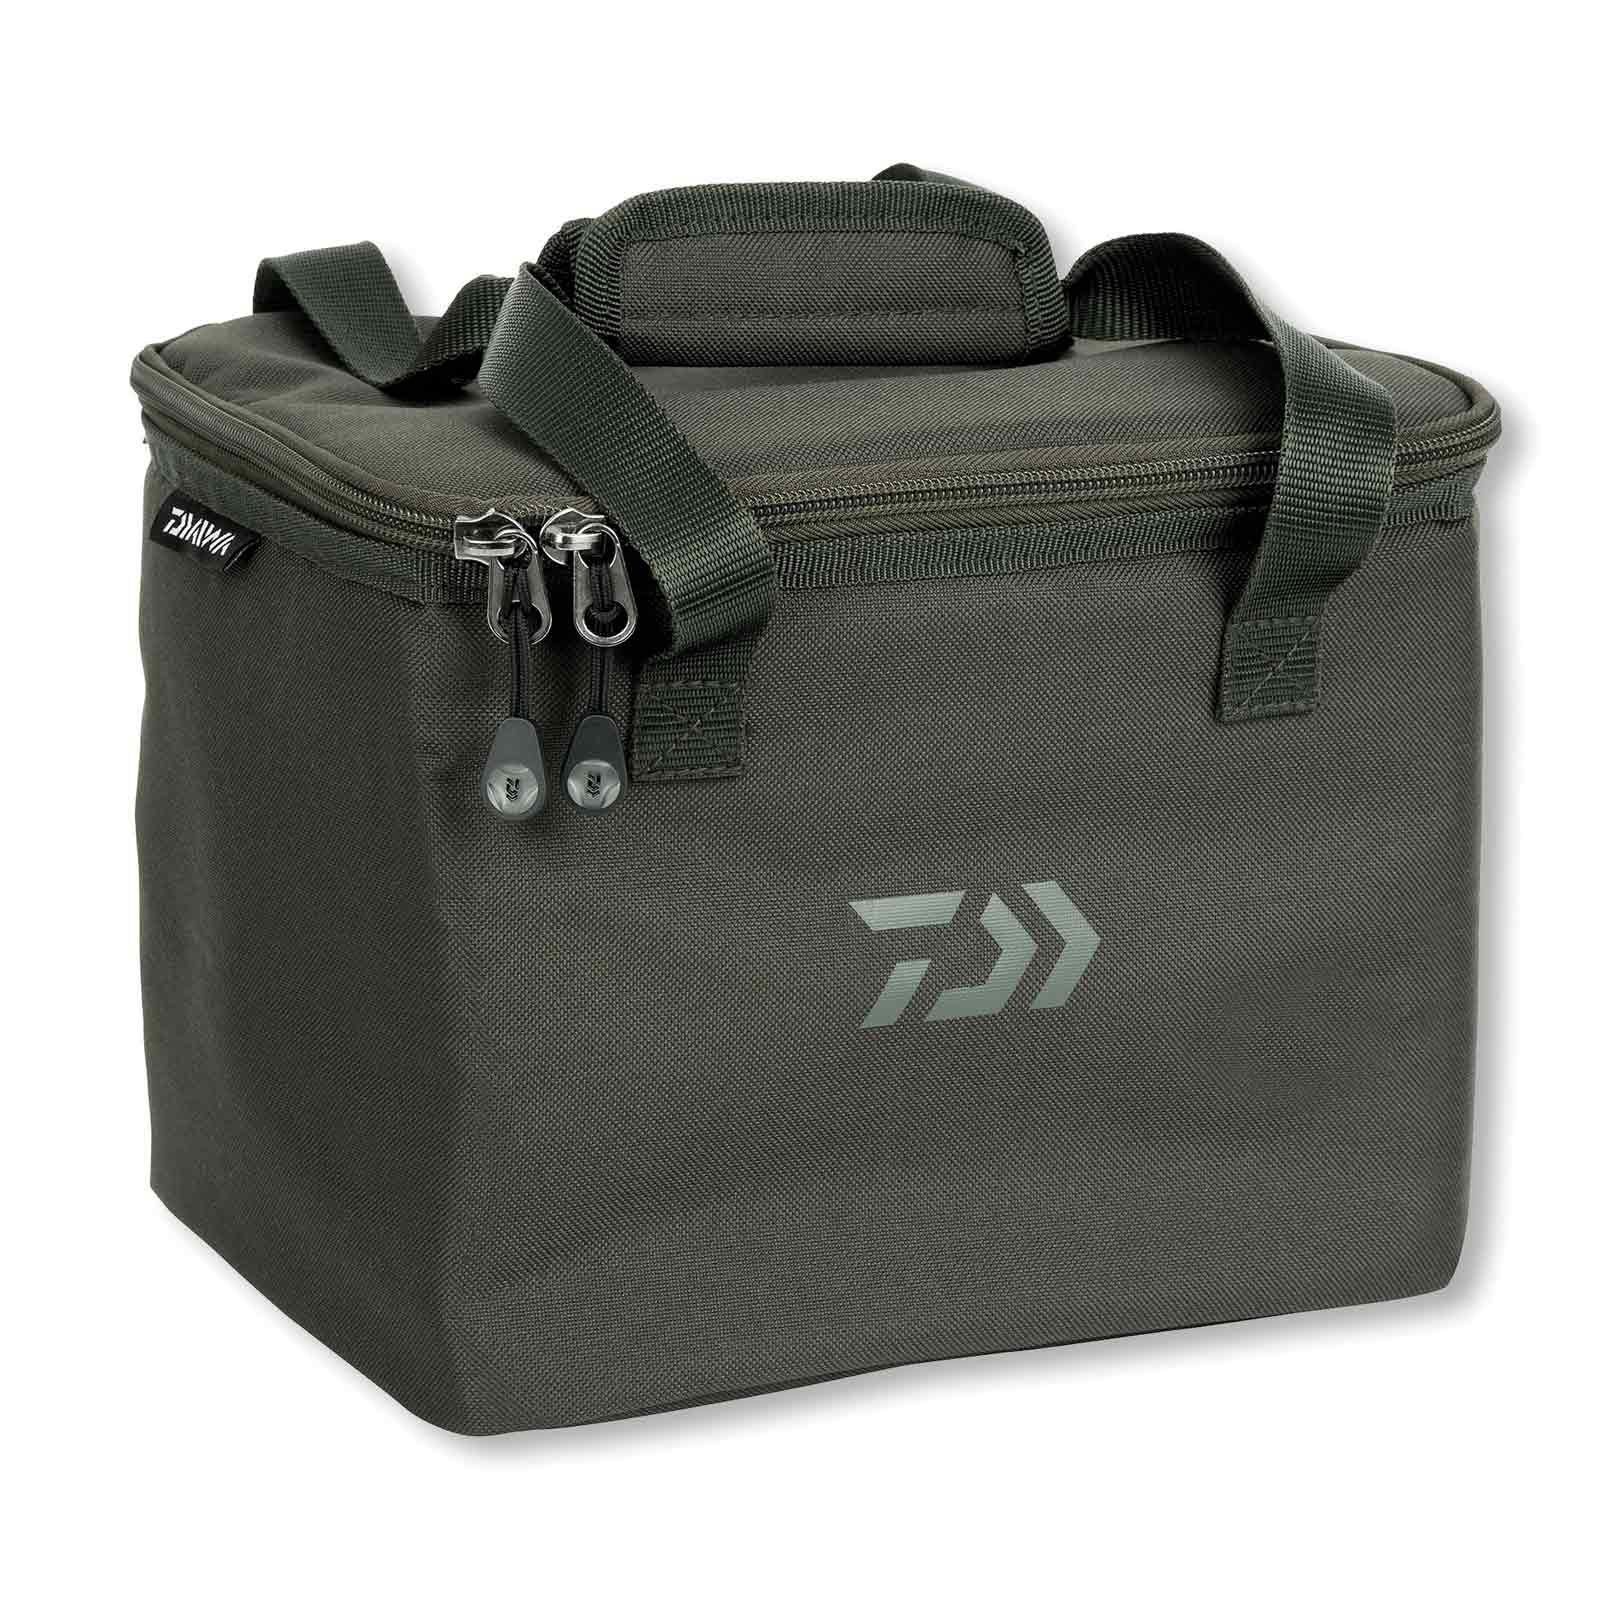 Daiwa Angelkoffer, IS Large Accessory & Cool Bag